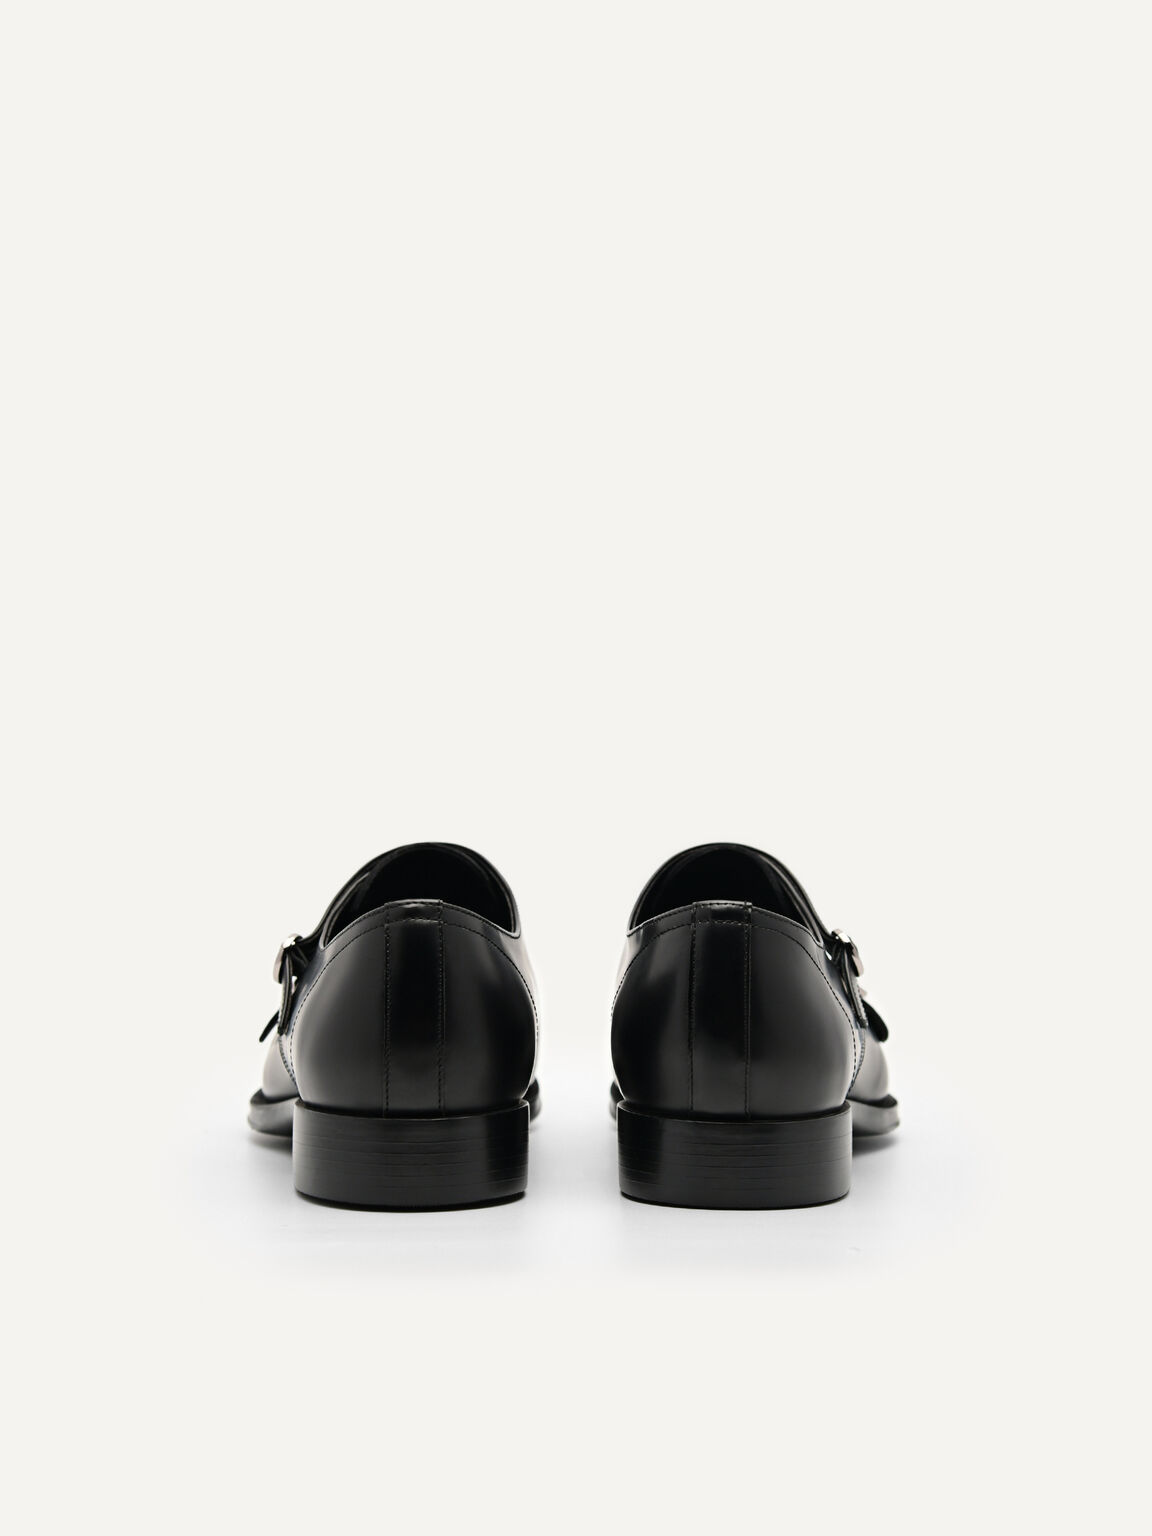 Holly Leather Double Monkstrap Shoes, Black